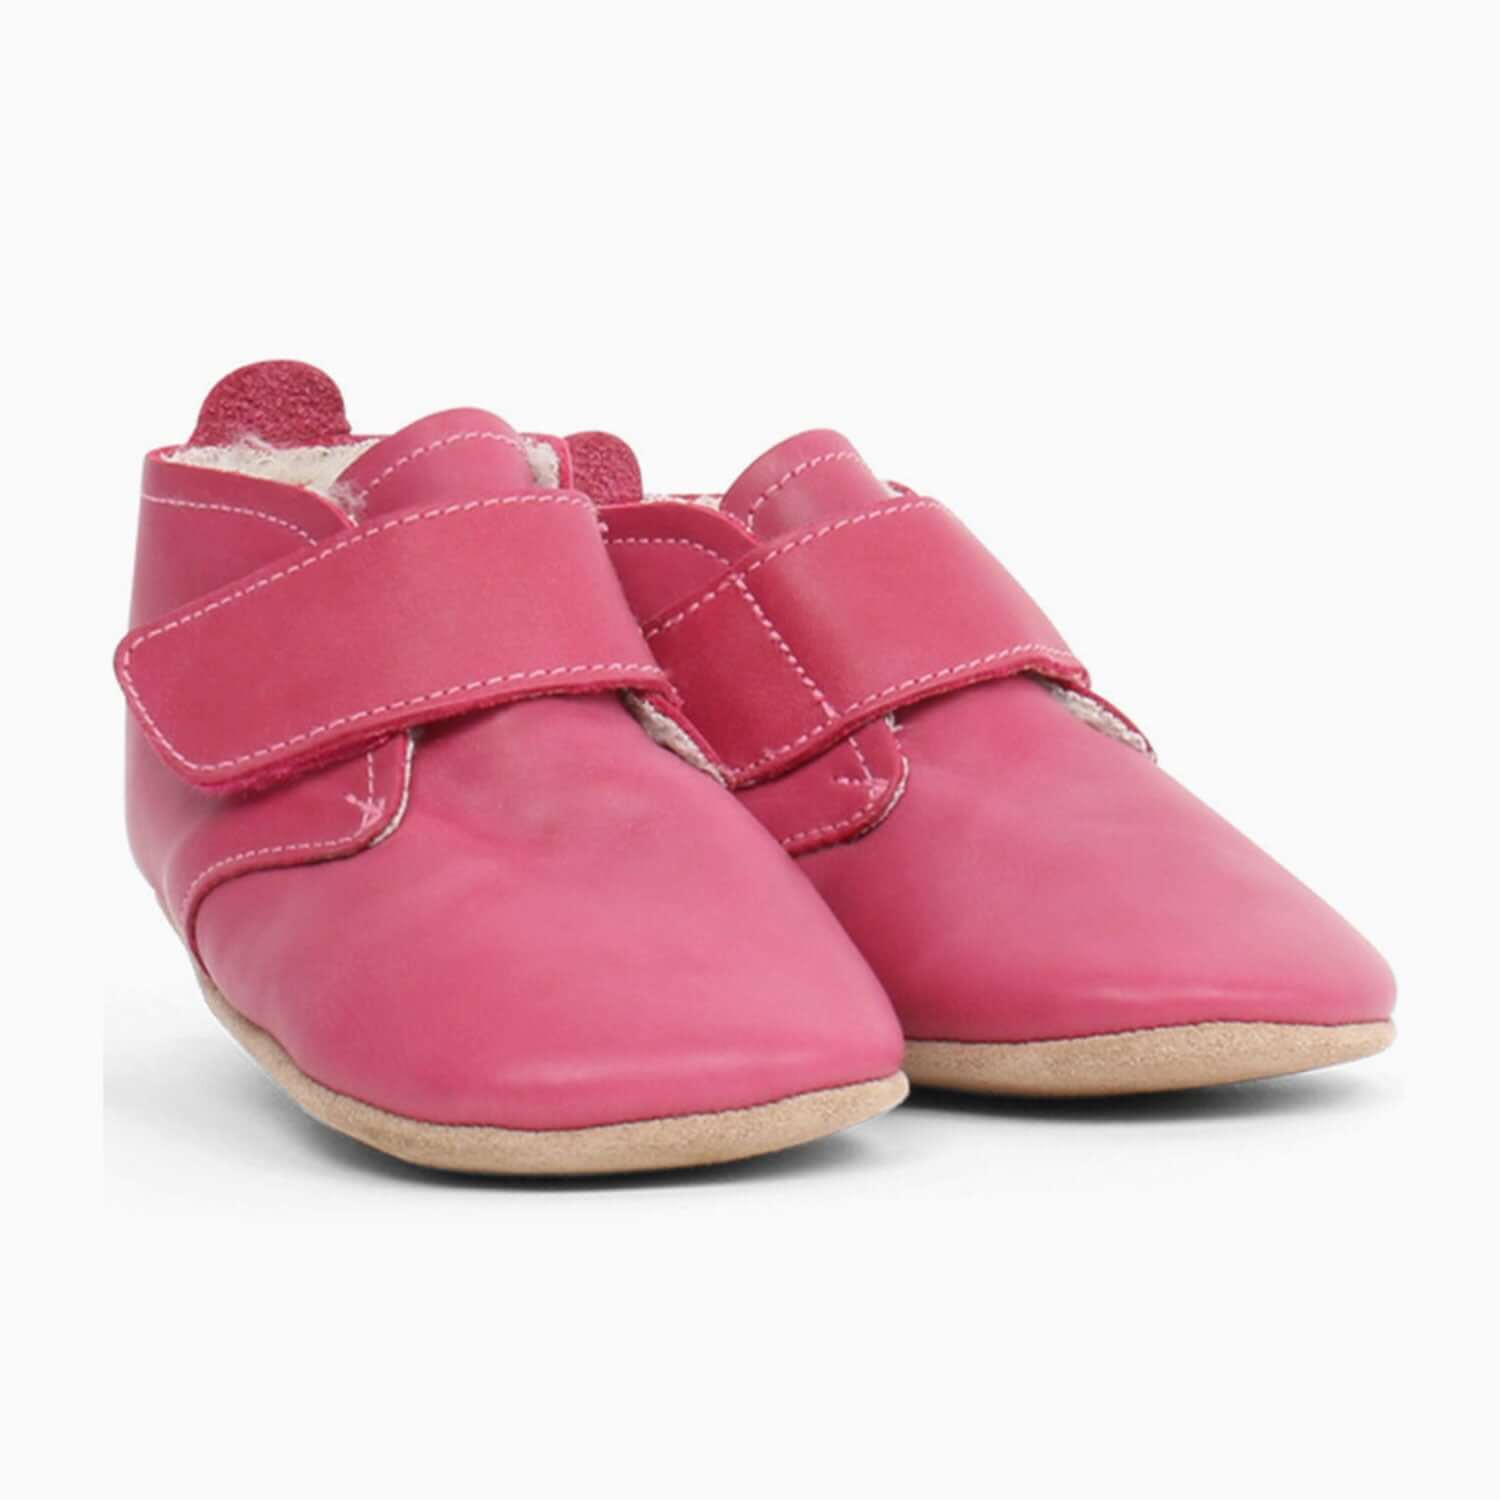 An image of Baby Shoes - Pre Walkers - Soft Sole Lined Boots | Bobux Dark Pink / XL